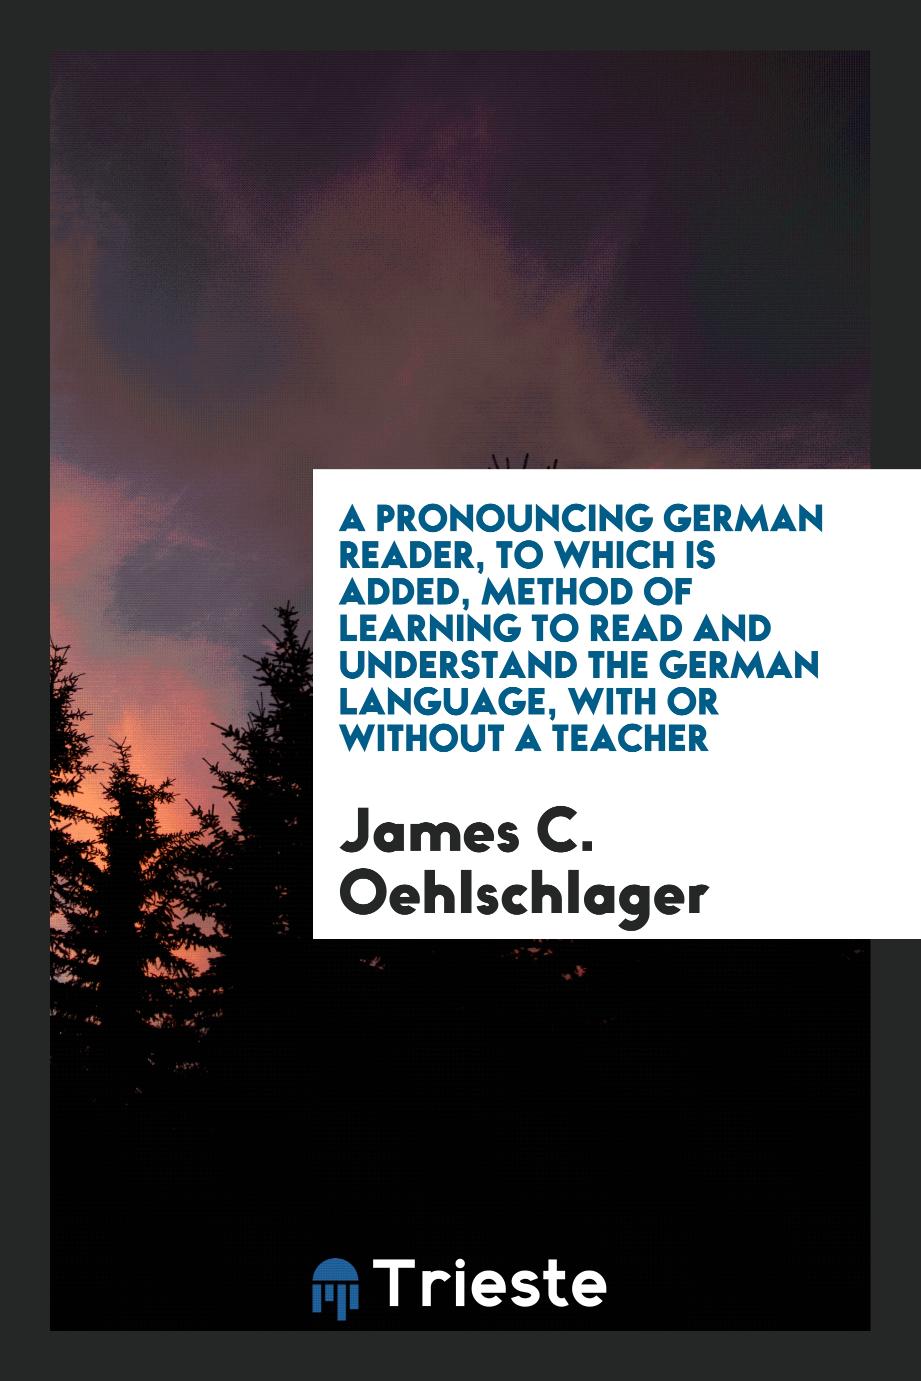 A Pronouncing German Reader, to Which Is Added, Method of Learning to Read and Understand the German Language, with or without a Teacher